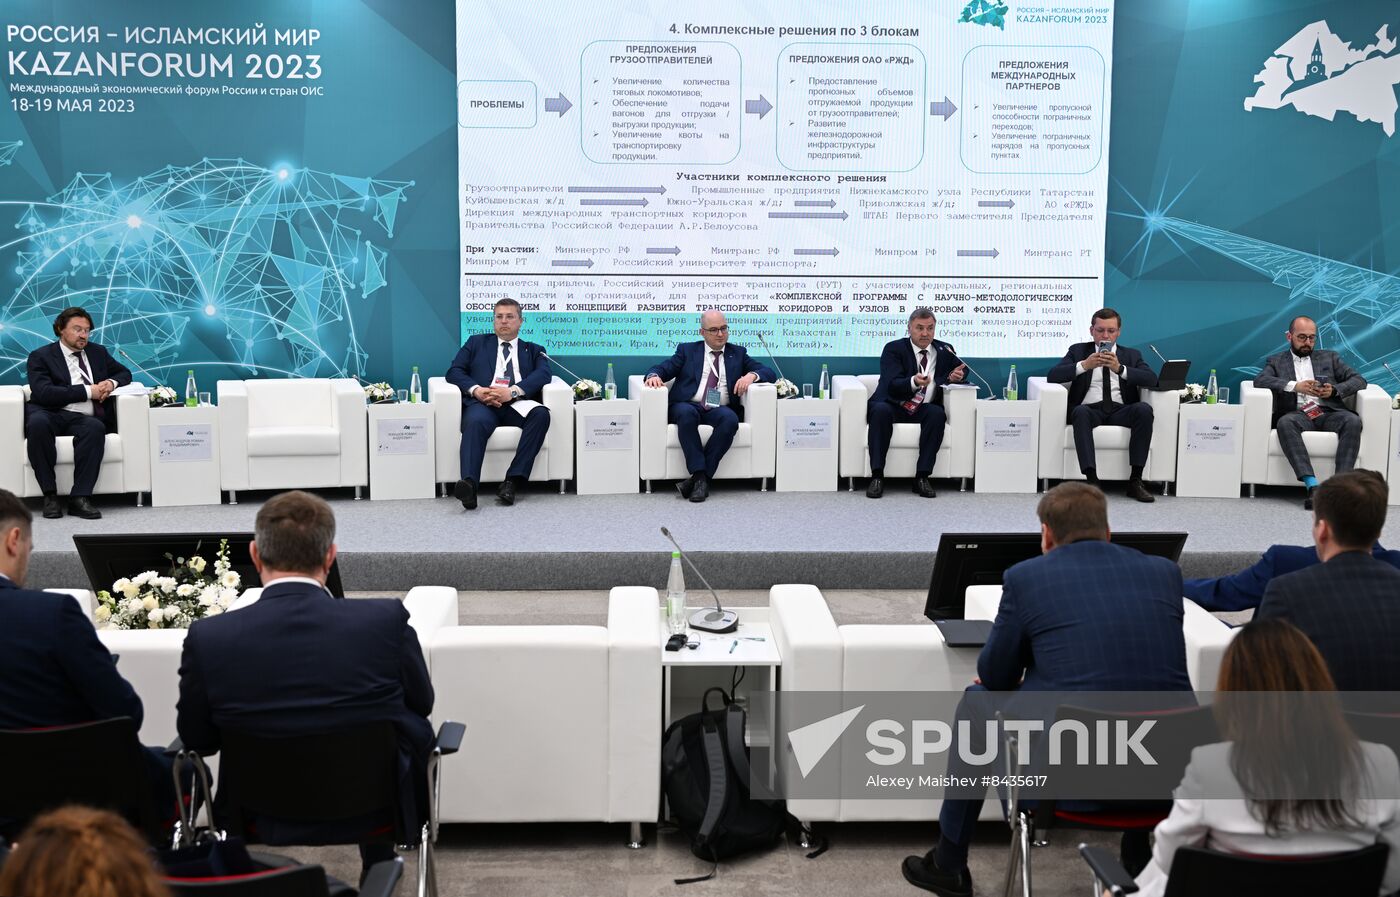 KAZANFORUM 2023. Intersectoral cooperation "logistics-production-trade" as a tool for expending foreign trade relations